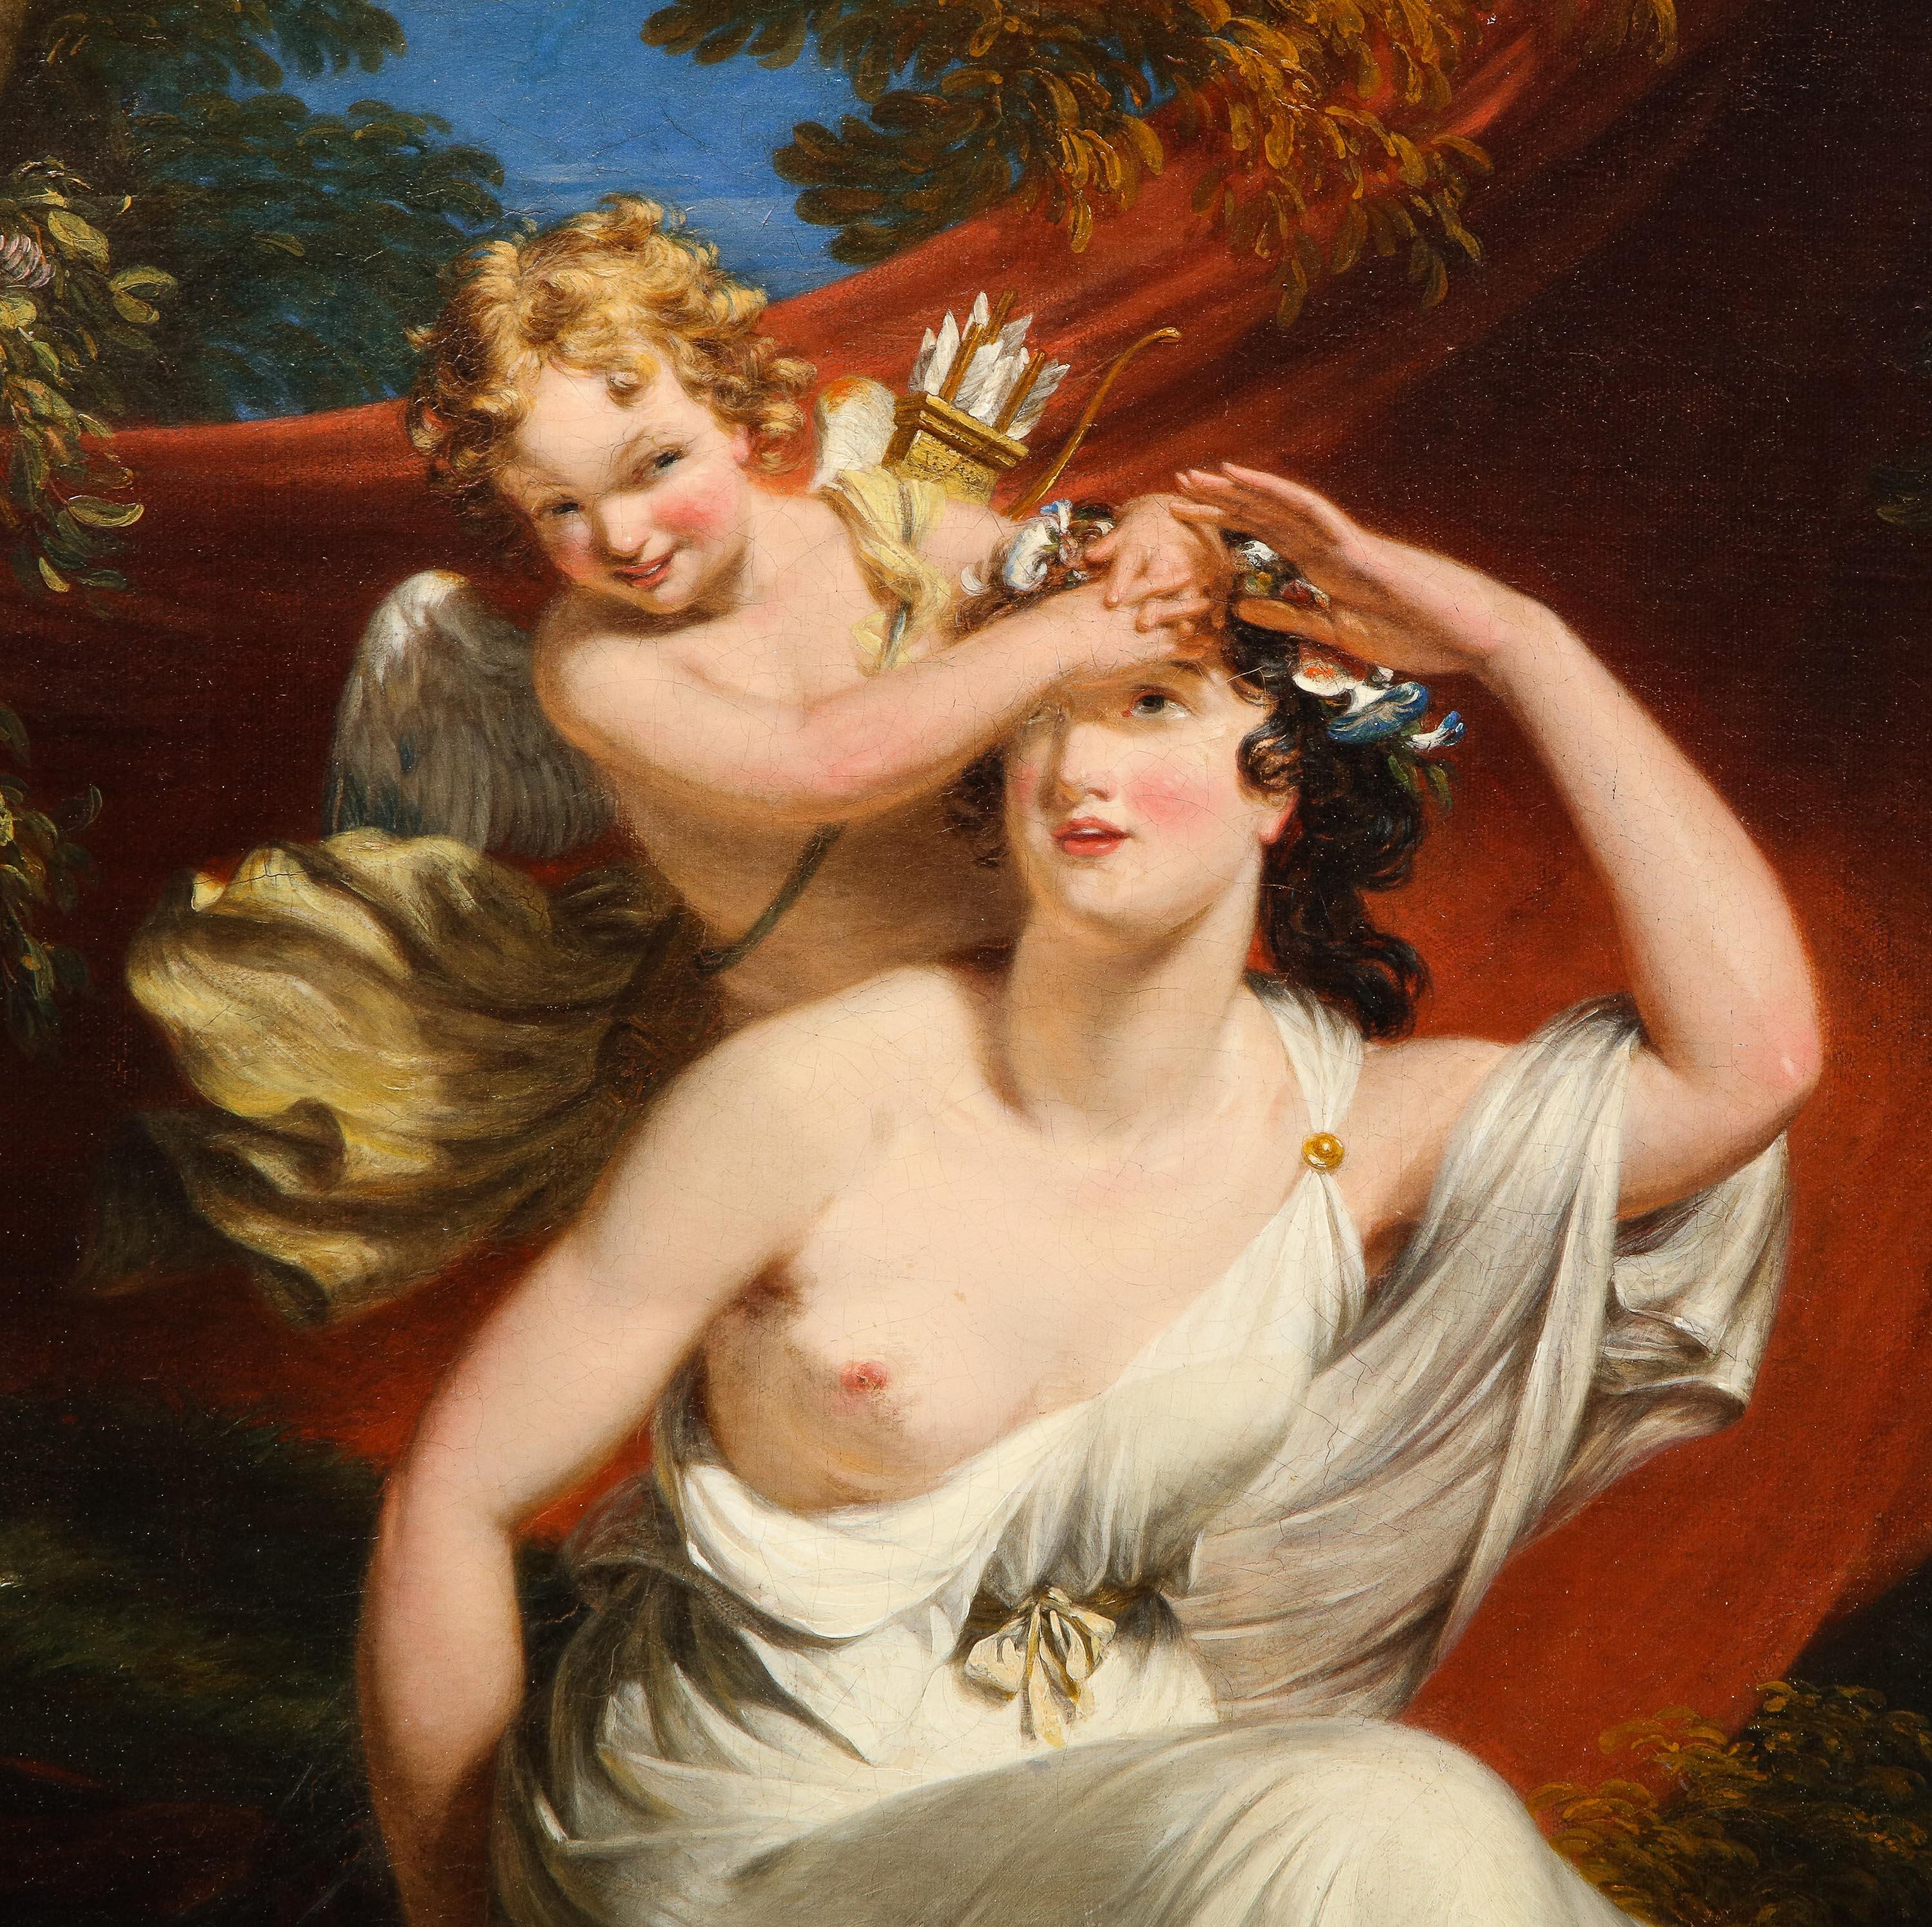 (French School) 18th Century, An Exceptional Quality Portrait of Venus and Cupid - Romantic Painting by Unknown